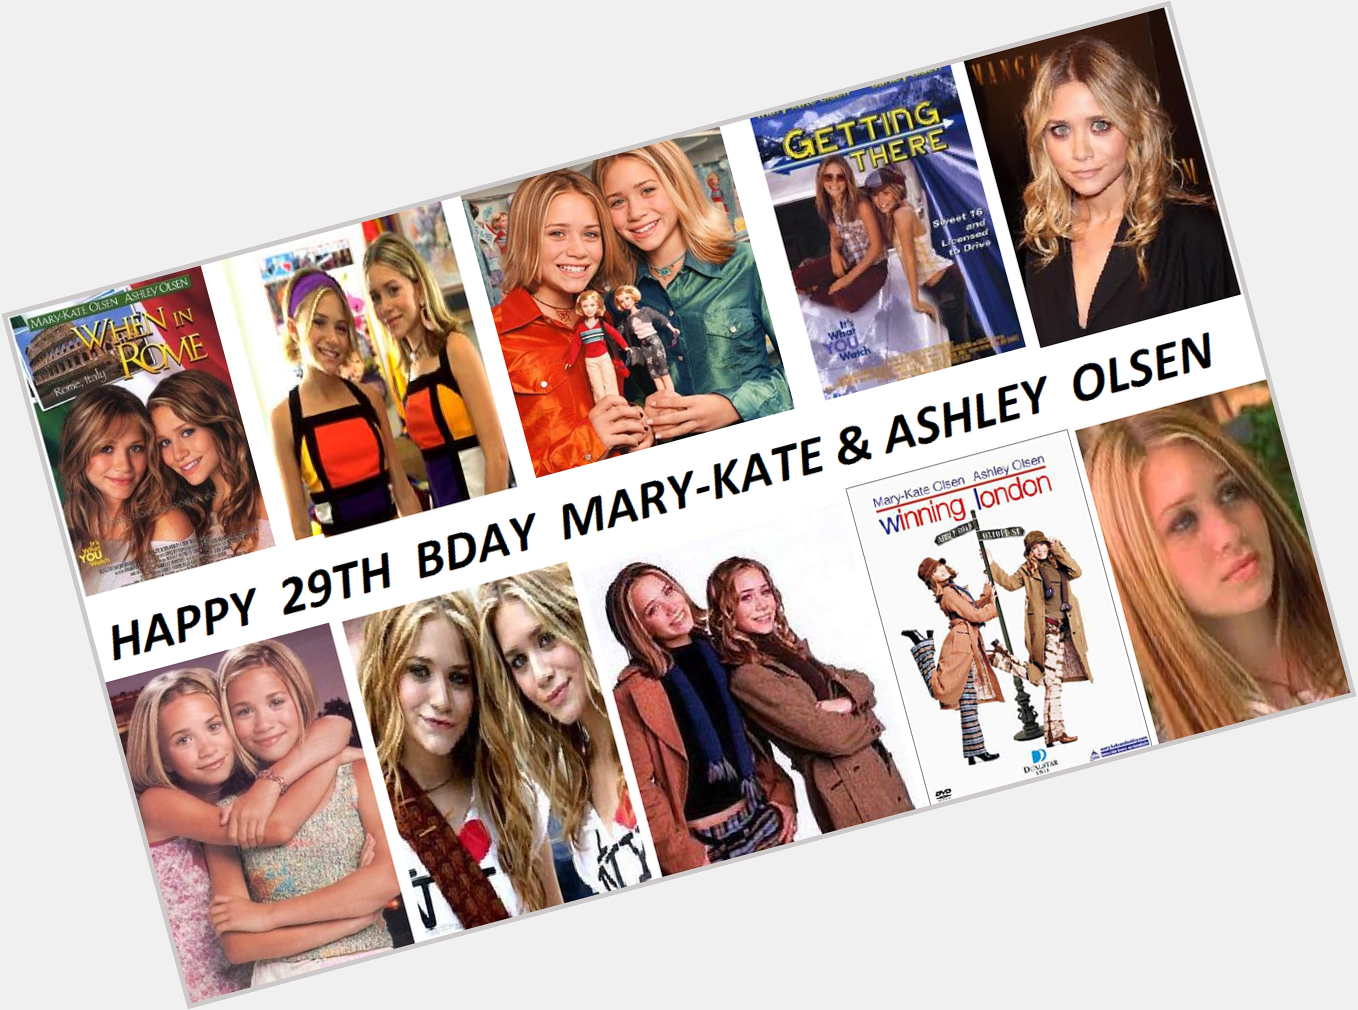 Happy 29th bday to my favorite celebrity twins, Mary-Kate & Ashley Olsen, I love you girls & ya movies are trilla 